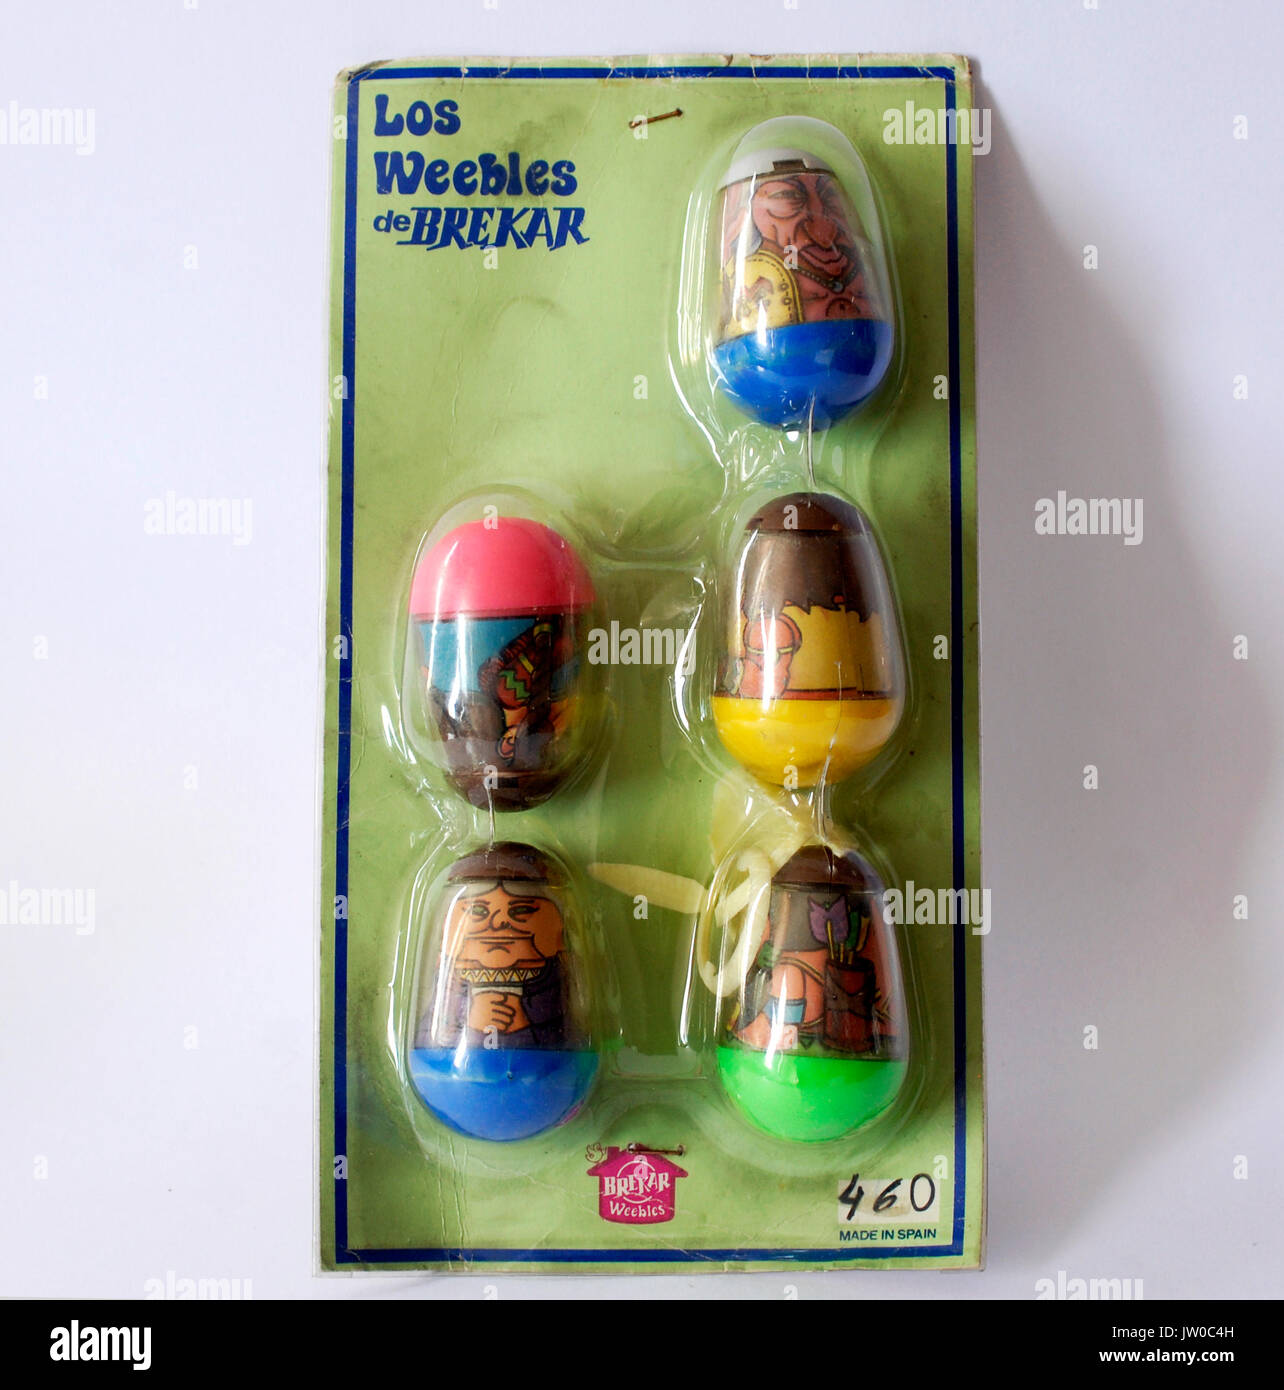 Vintage Spanish collectible toy Los Weebles de Bekar. Indios, plastic blister. from the store Stock Photo